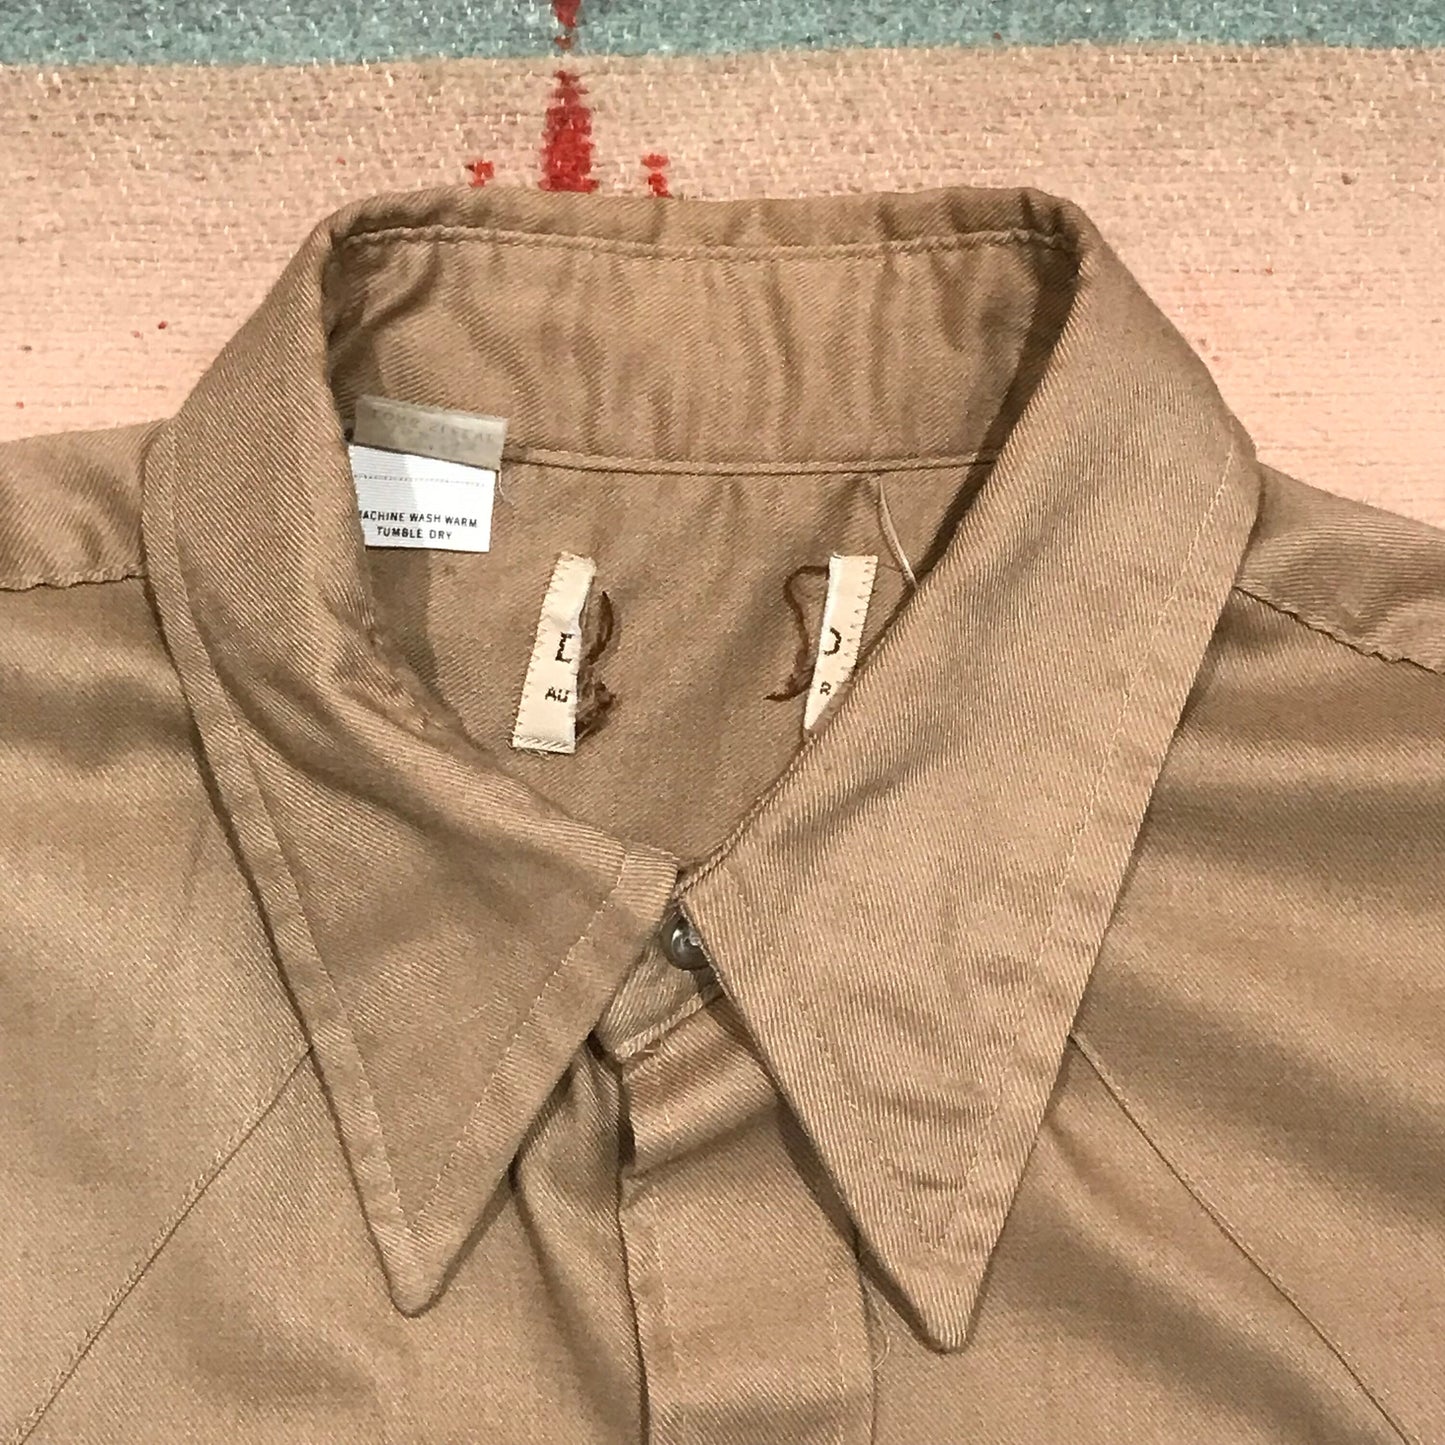 1970s Dee Cee Brand Sawtooth Pocket Pleated Western Shirt Made in USA Size S/M